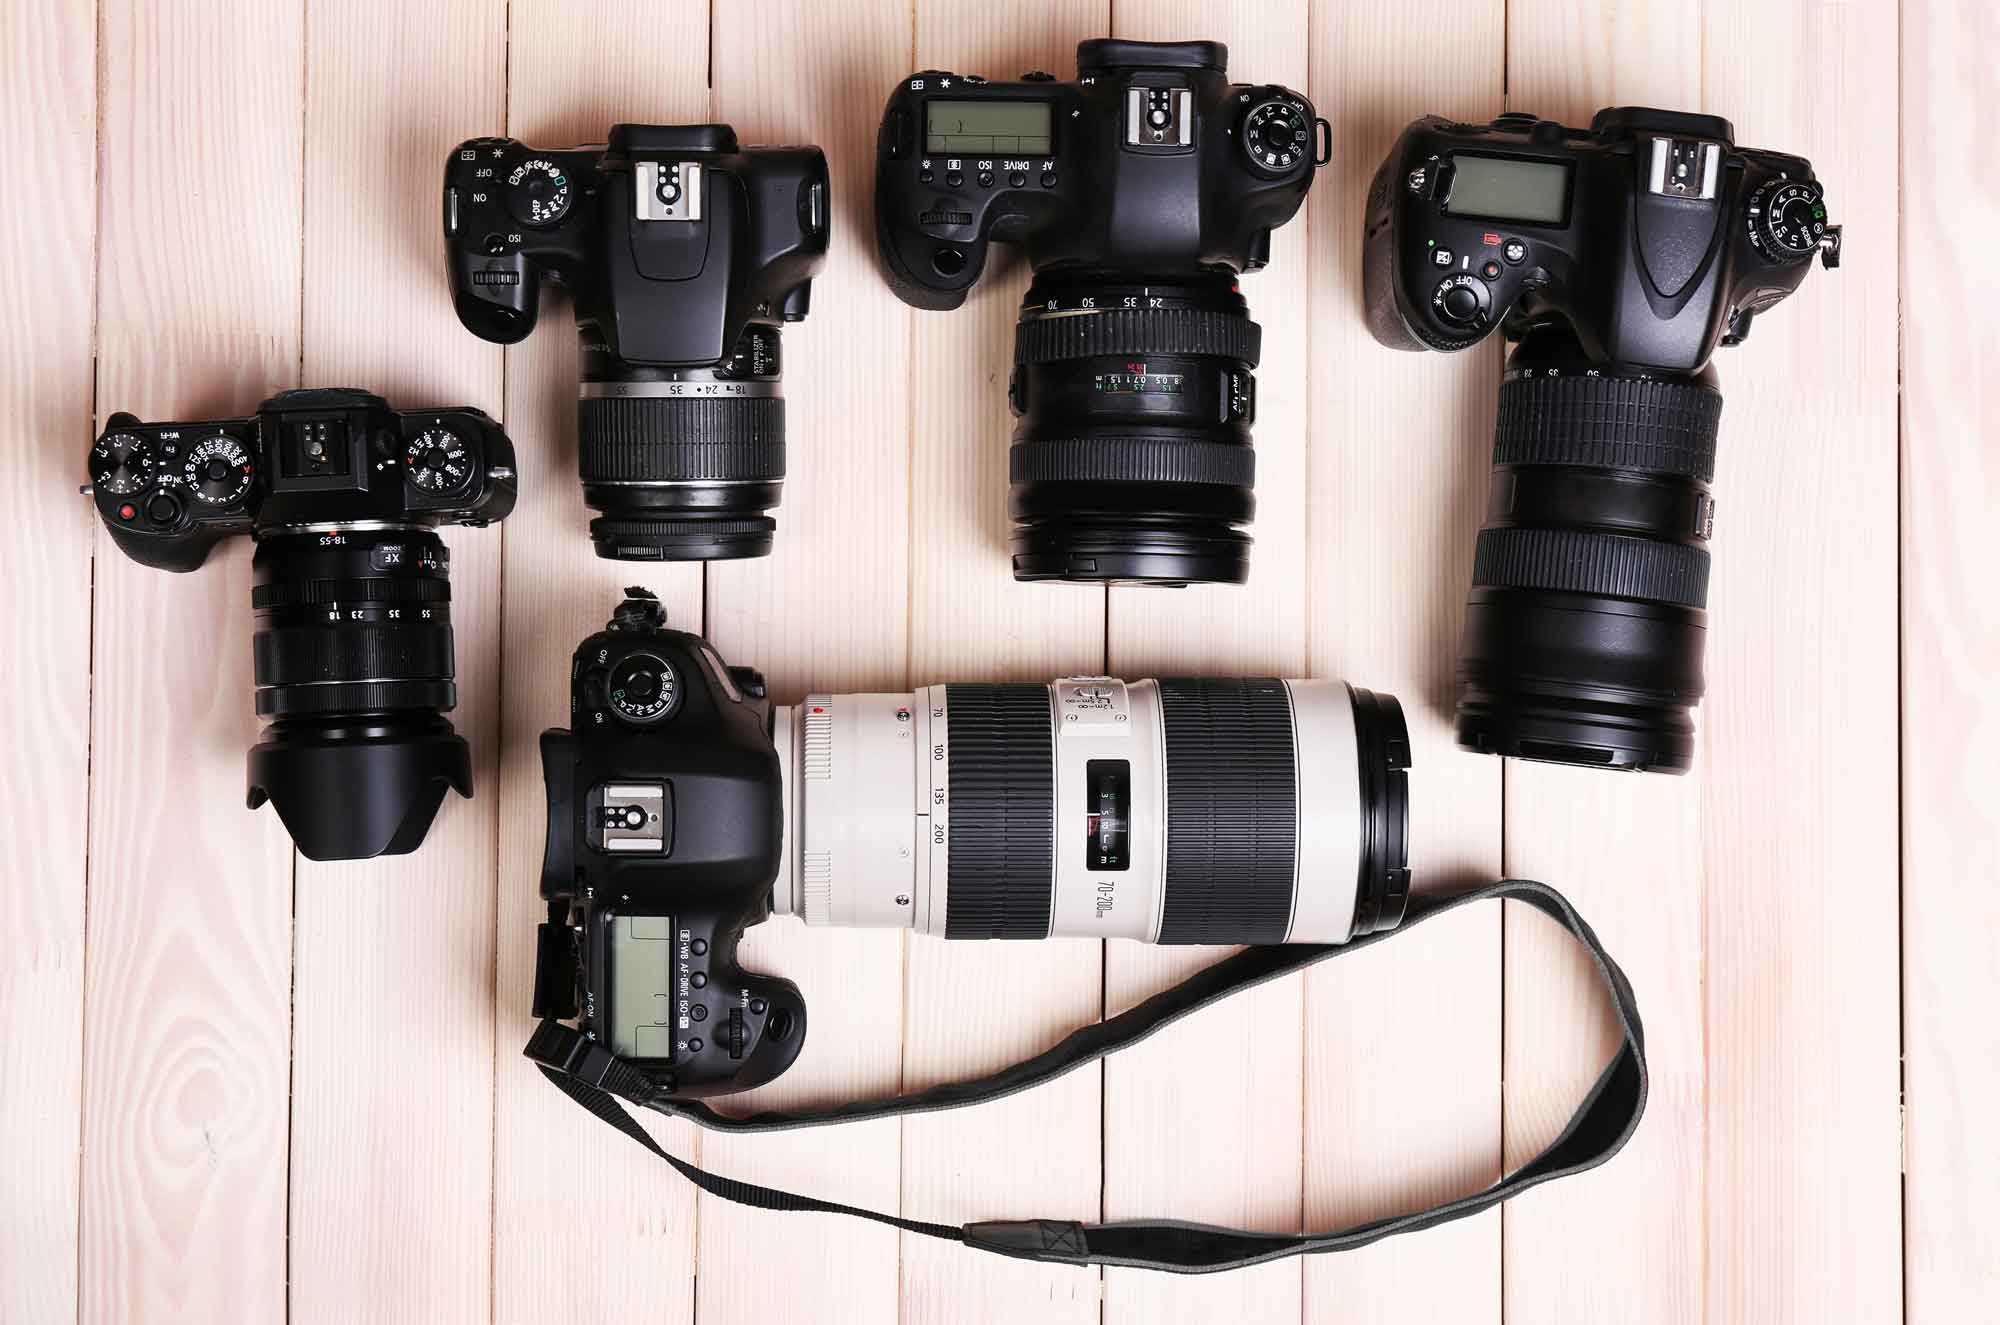 How much can you save by buying cameras online? 